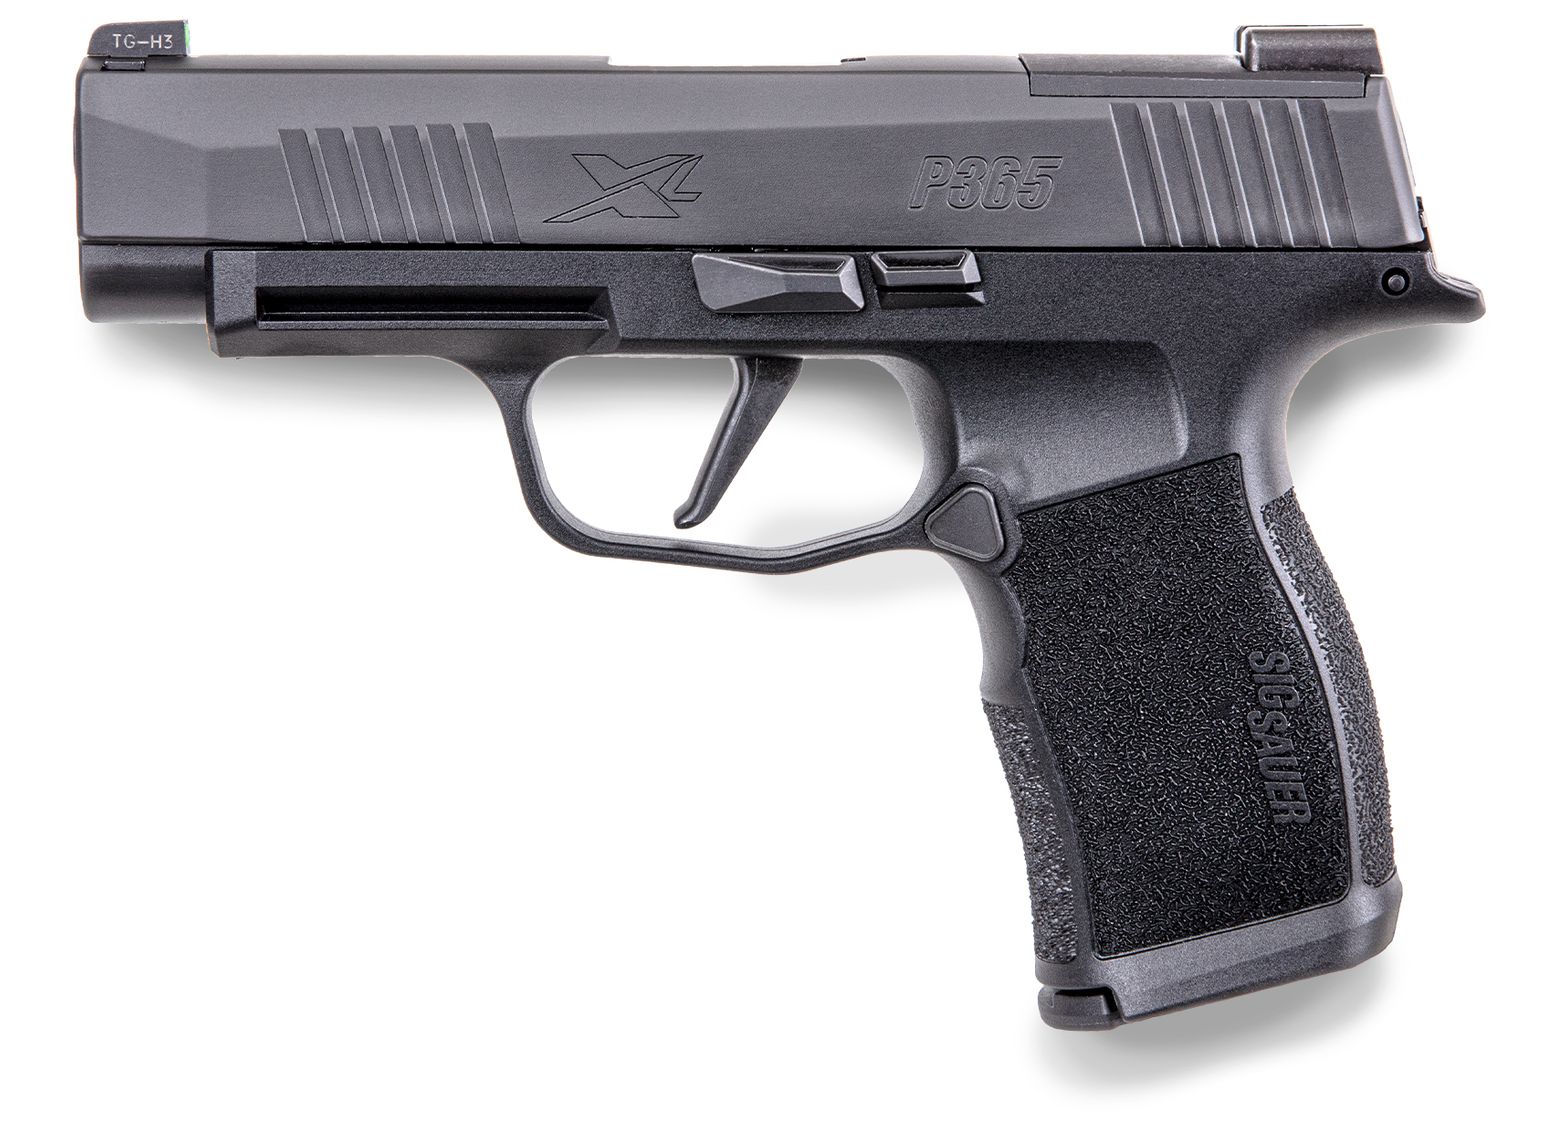 p365-pistol-does-sig-sauer-have-the-best-semi-automatic-gun-the